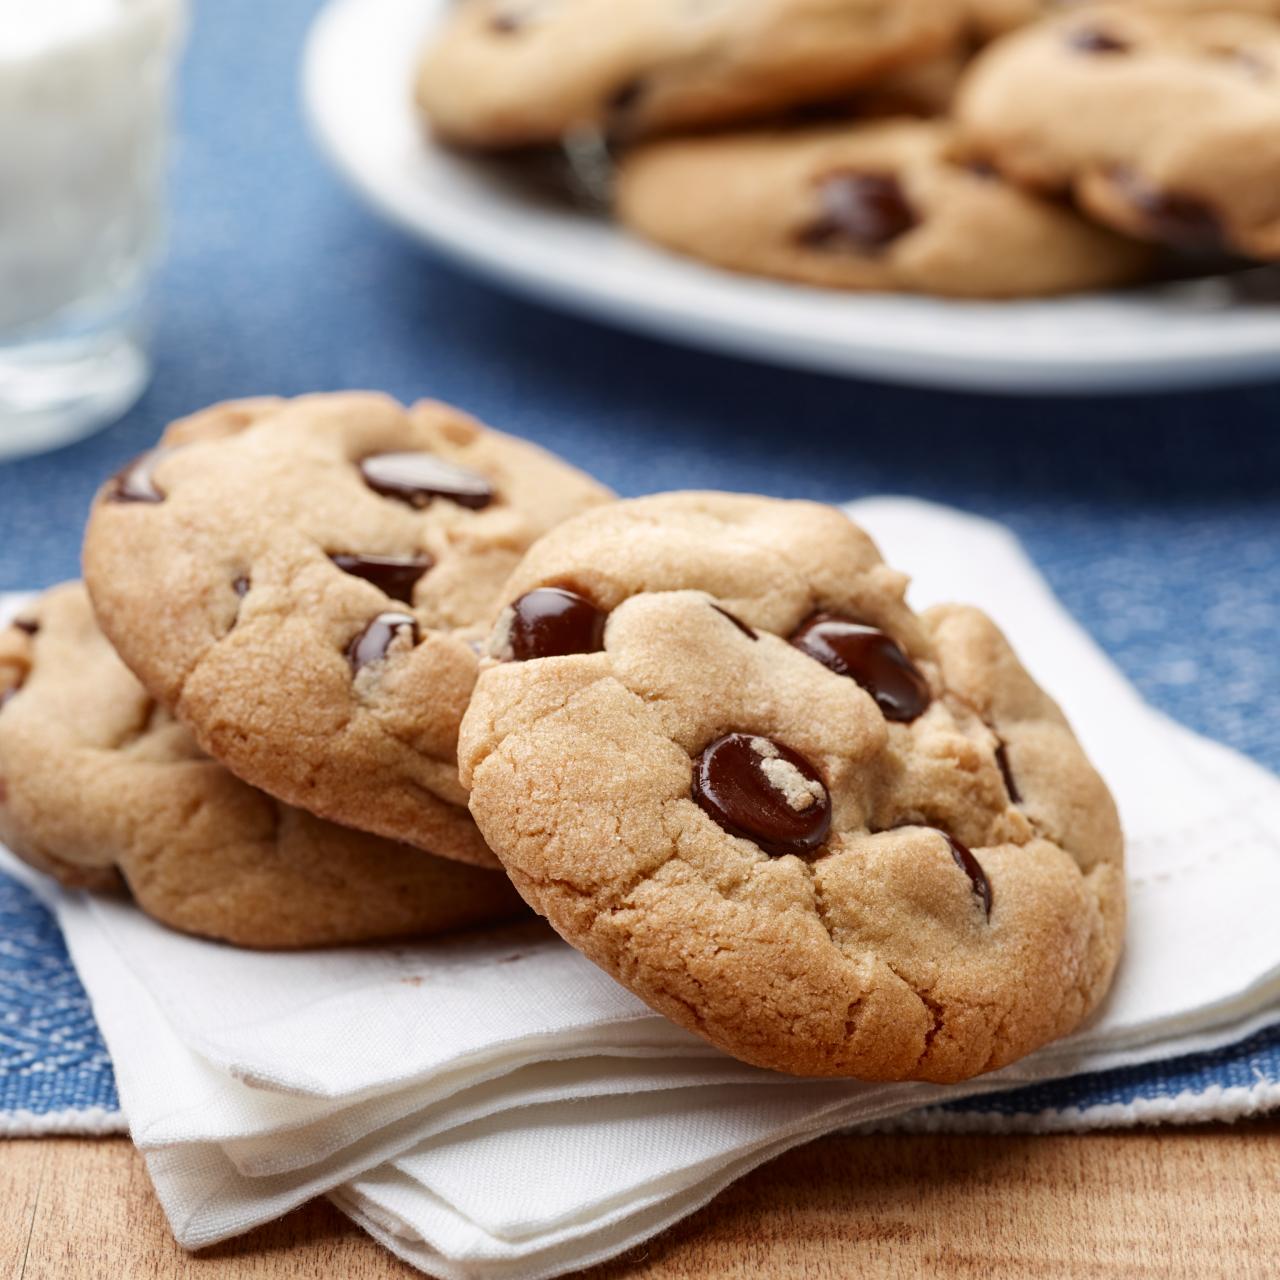 Best Chocolate Chip Cookie Dippers Recipe - How to Make Chocolate